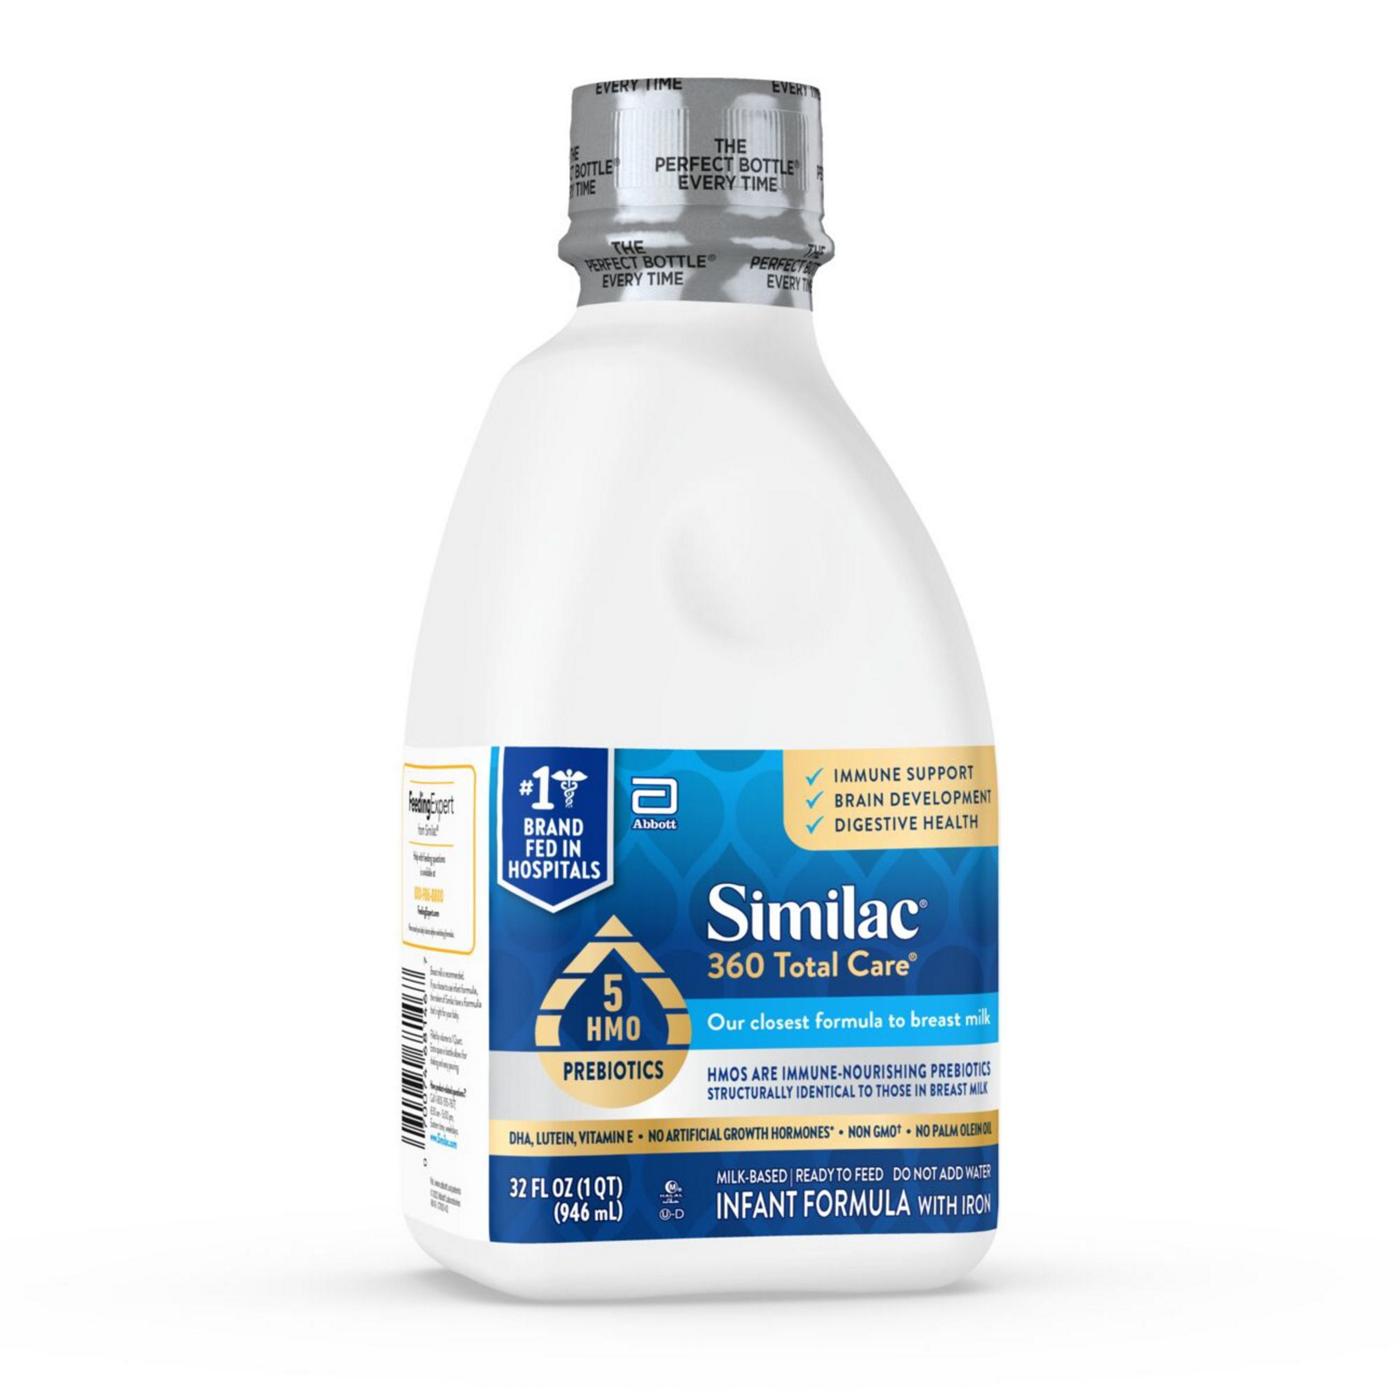 Similac 360 Total Care Ready-to-Feed Infant Formula with 5 HMO Prebiotics; image 3 of 8